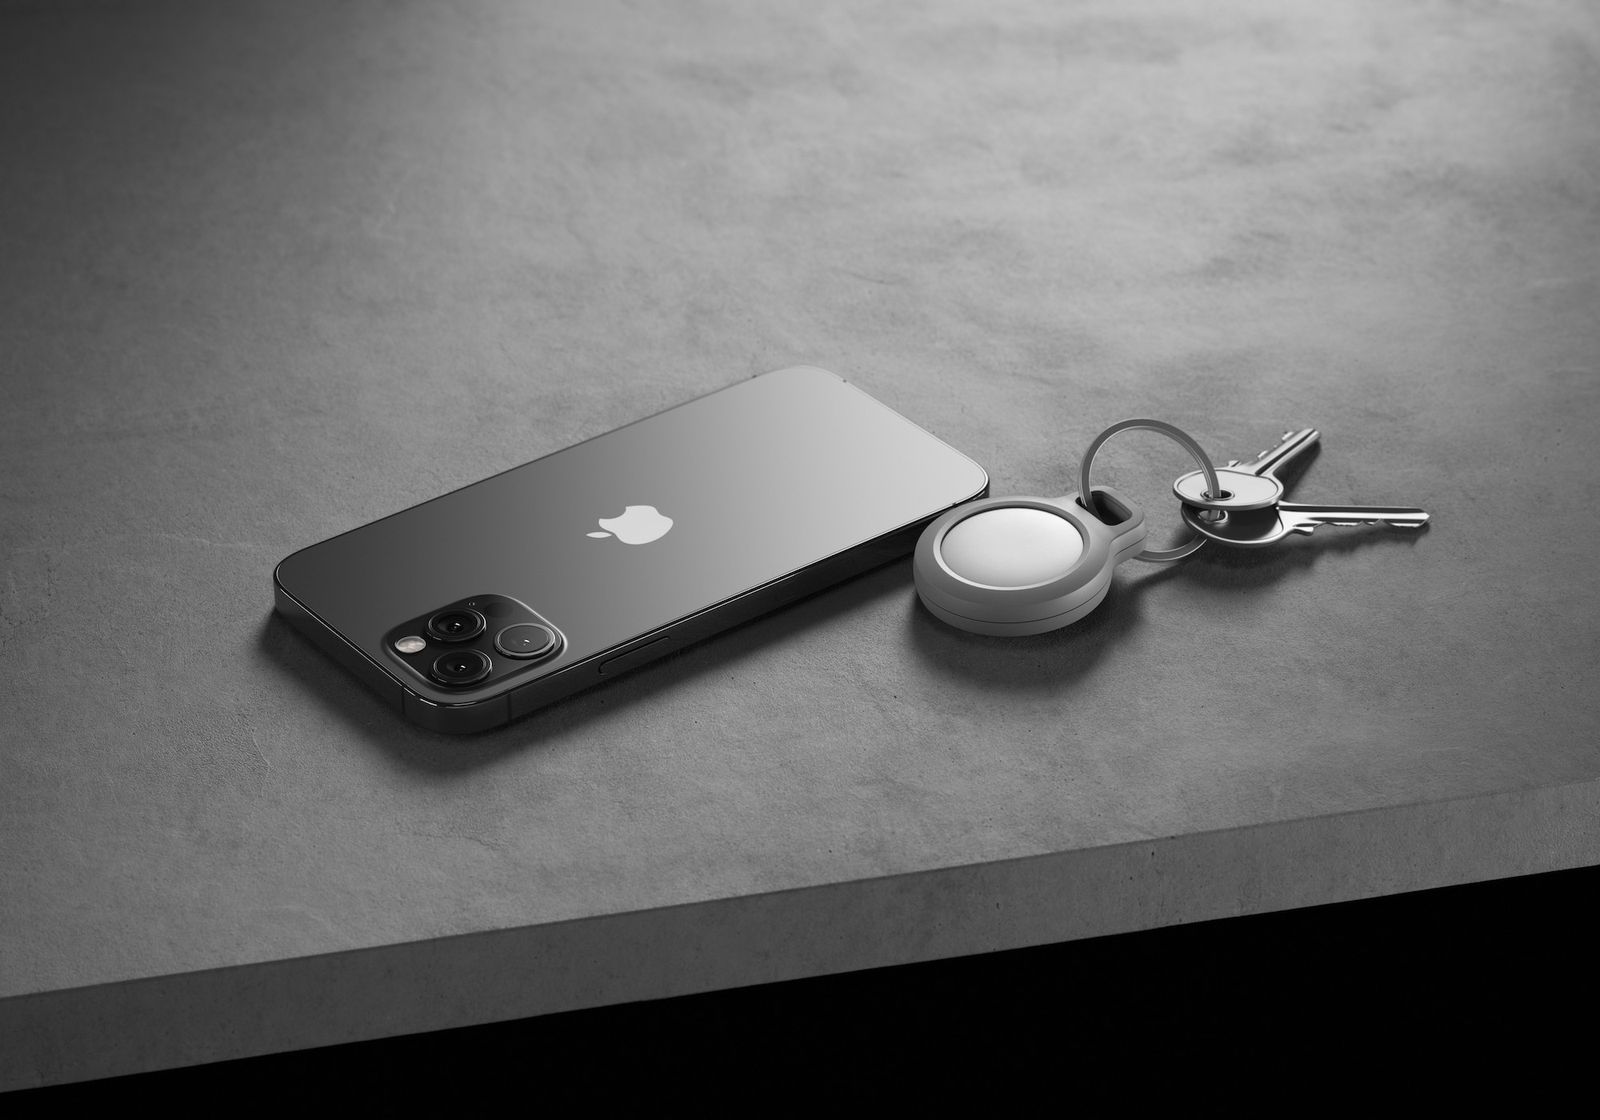 Nomad Announces \'Rugged Keychain\' for AirTag, Includes Add-On Engraving  Option for Pet ID Tags - MacRumors